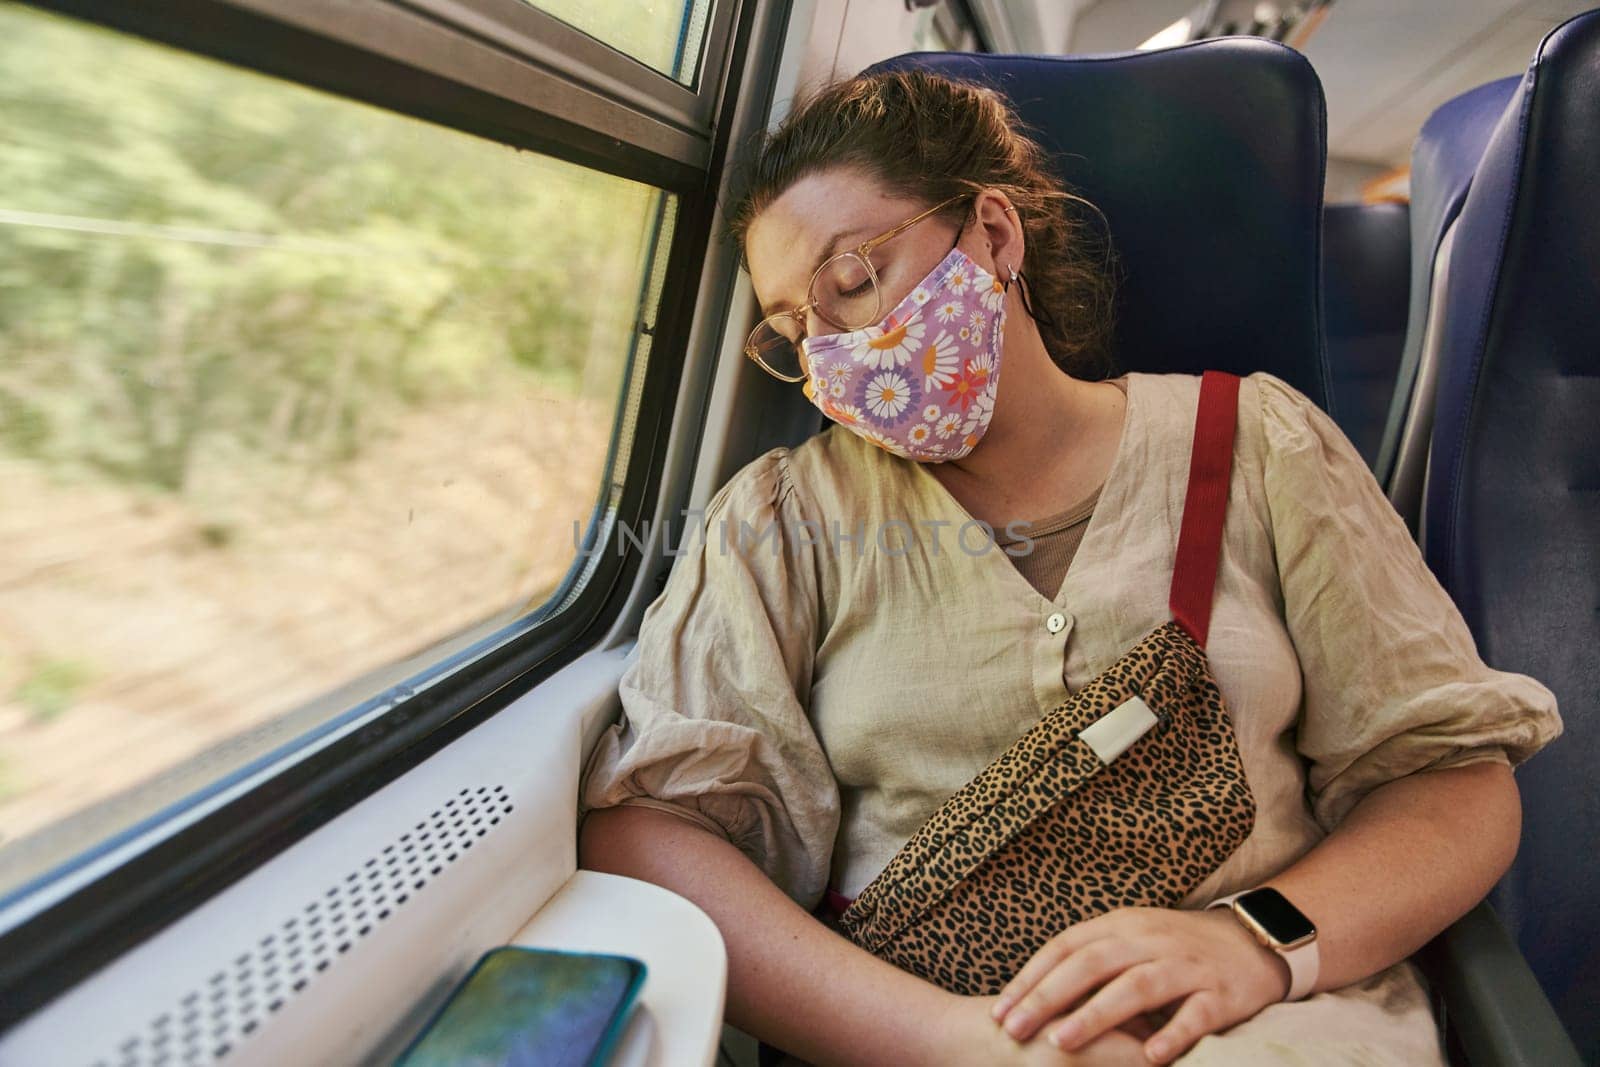 A girl with glasses in a medical mask sleeping on the train by driver-s